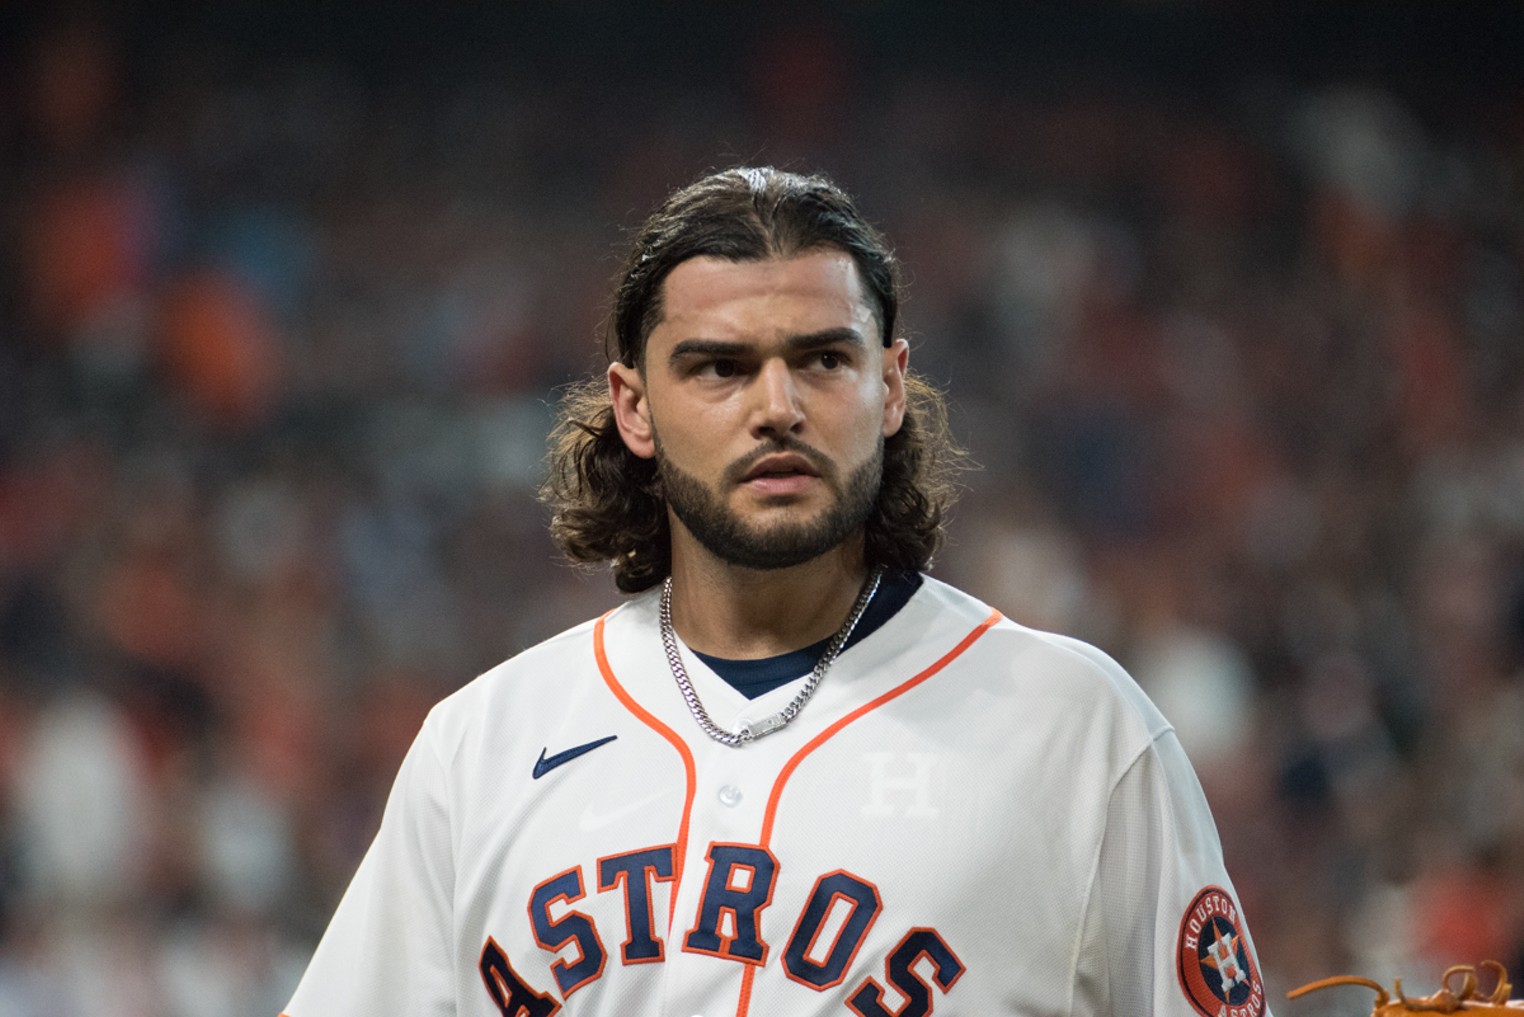 Biggest Questions Surrounding Astros Center on Health